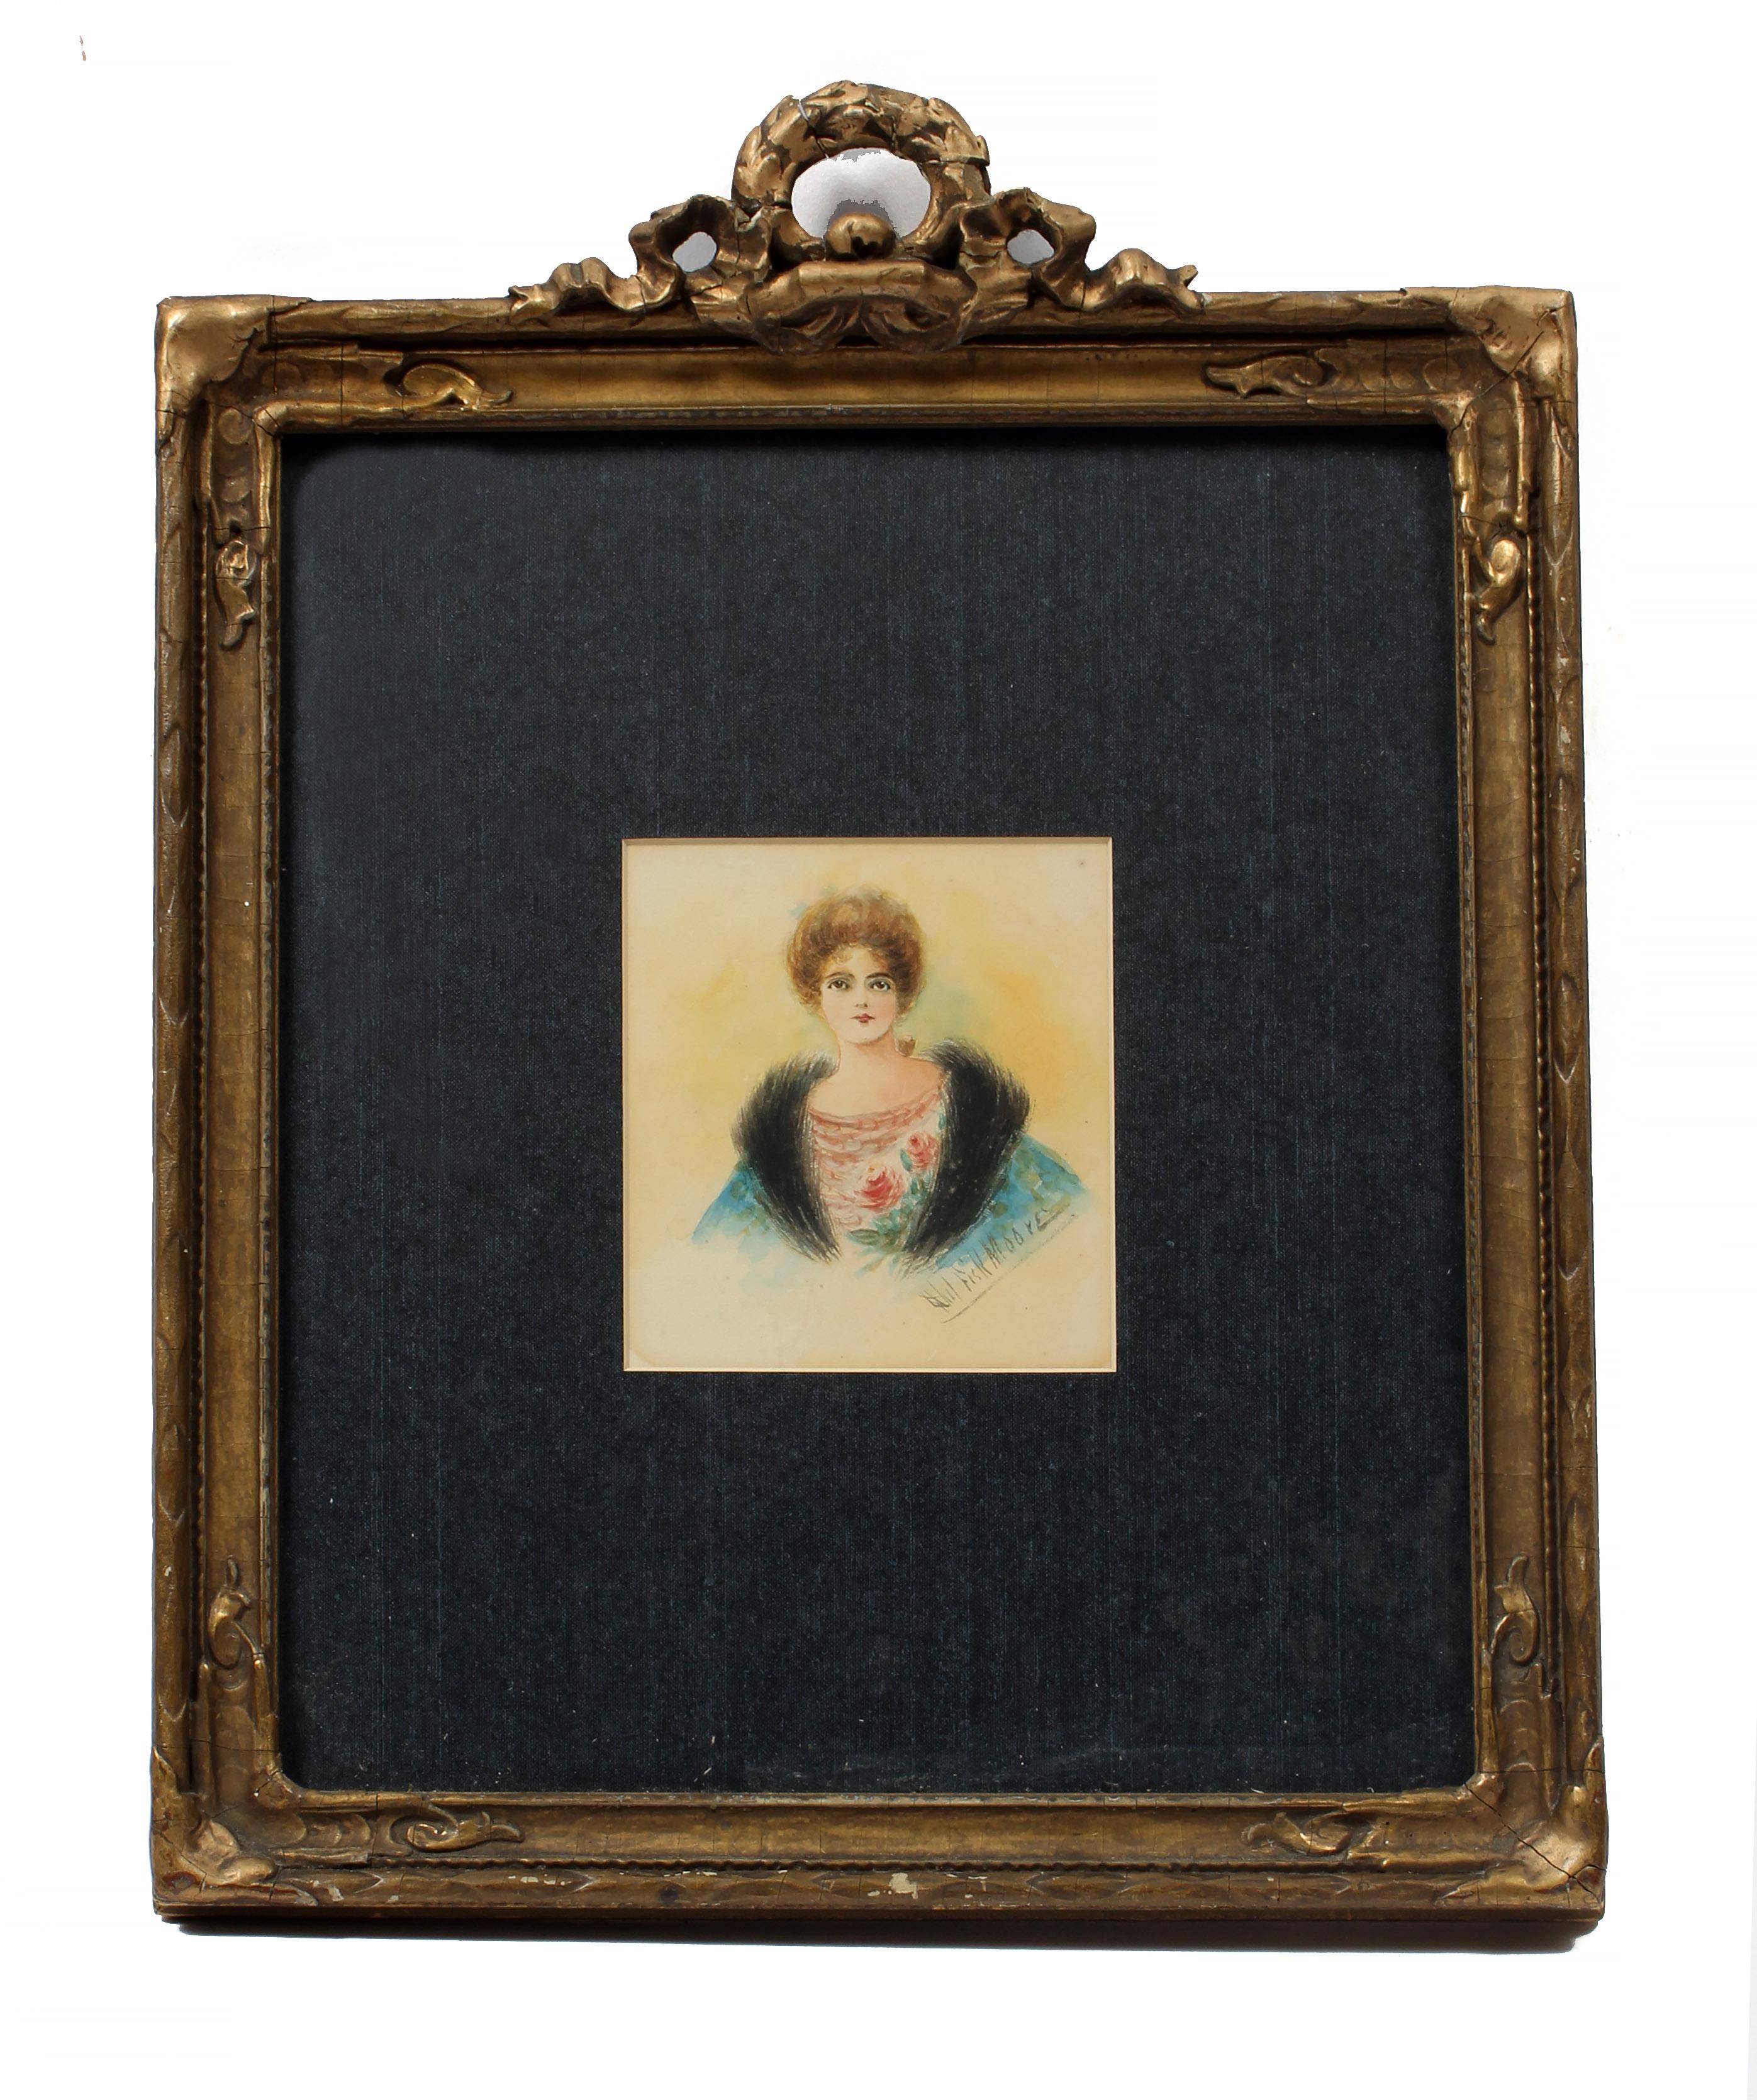 Miniature Antique American Portrait Painting of a Young Woman in original Frame